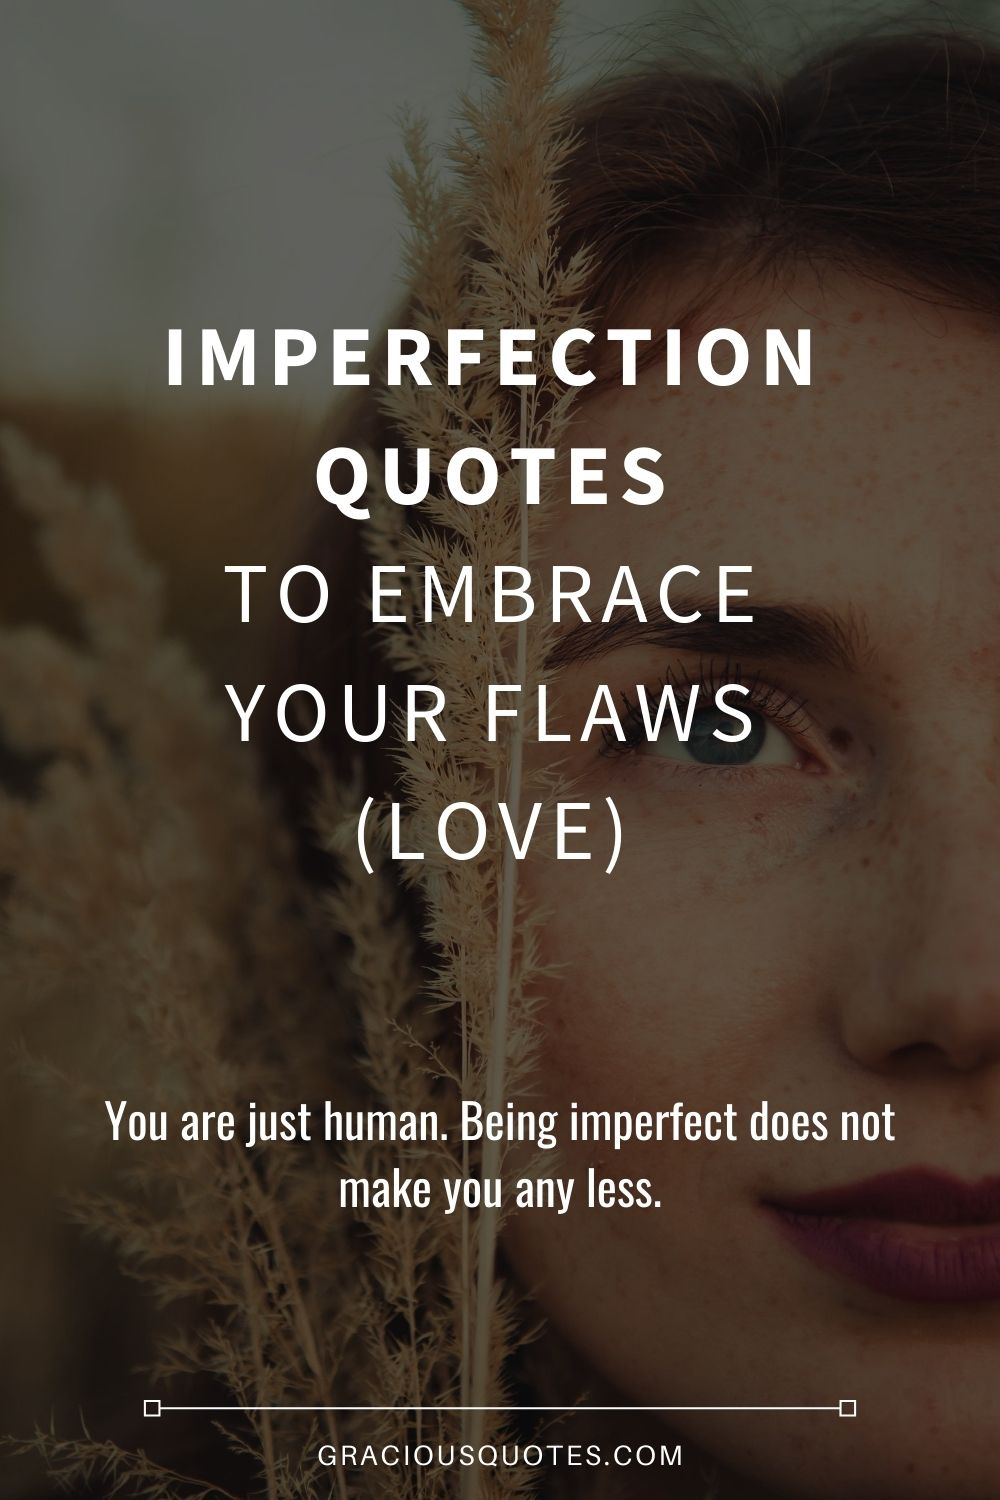 Imperfection Quotes to Embrace Your Flaws (LOVE) - Gracious Quotes